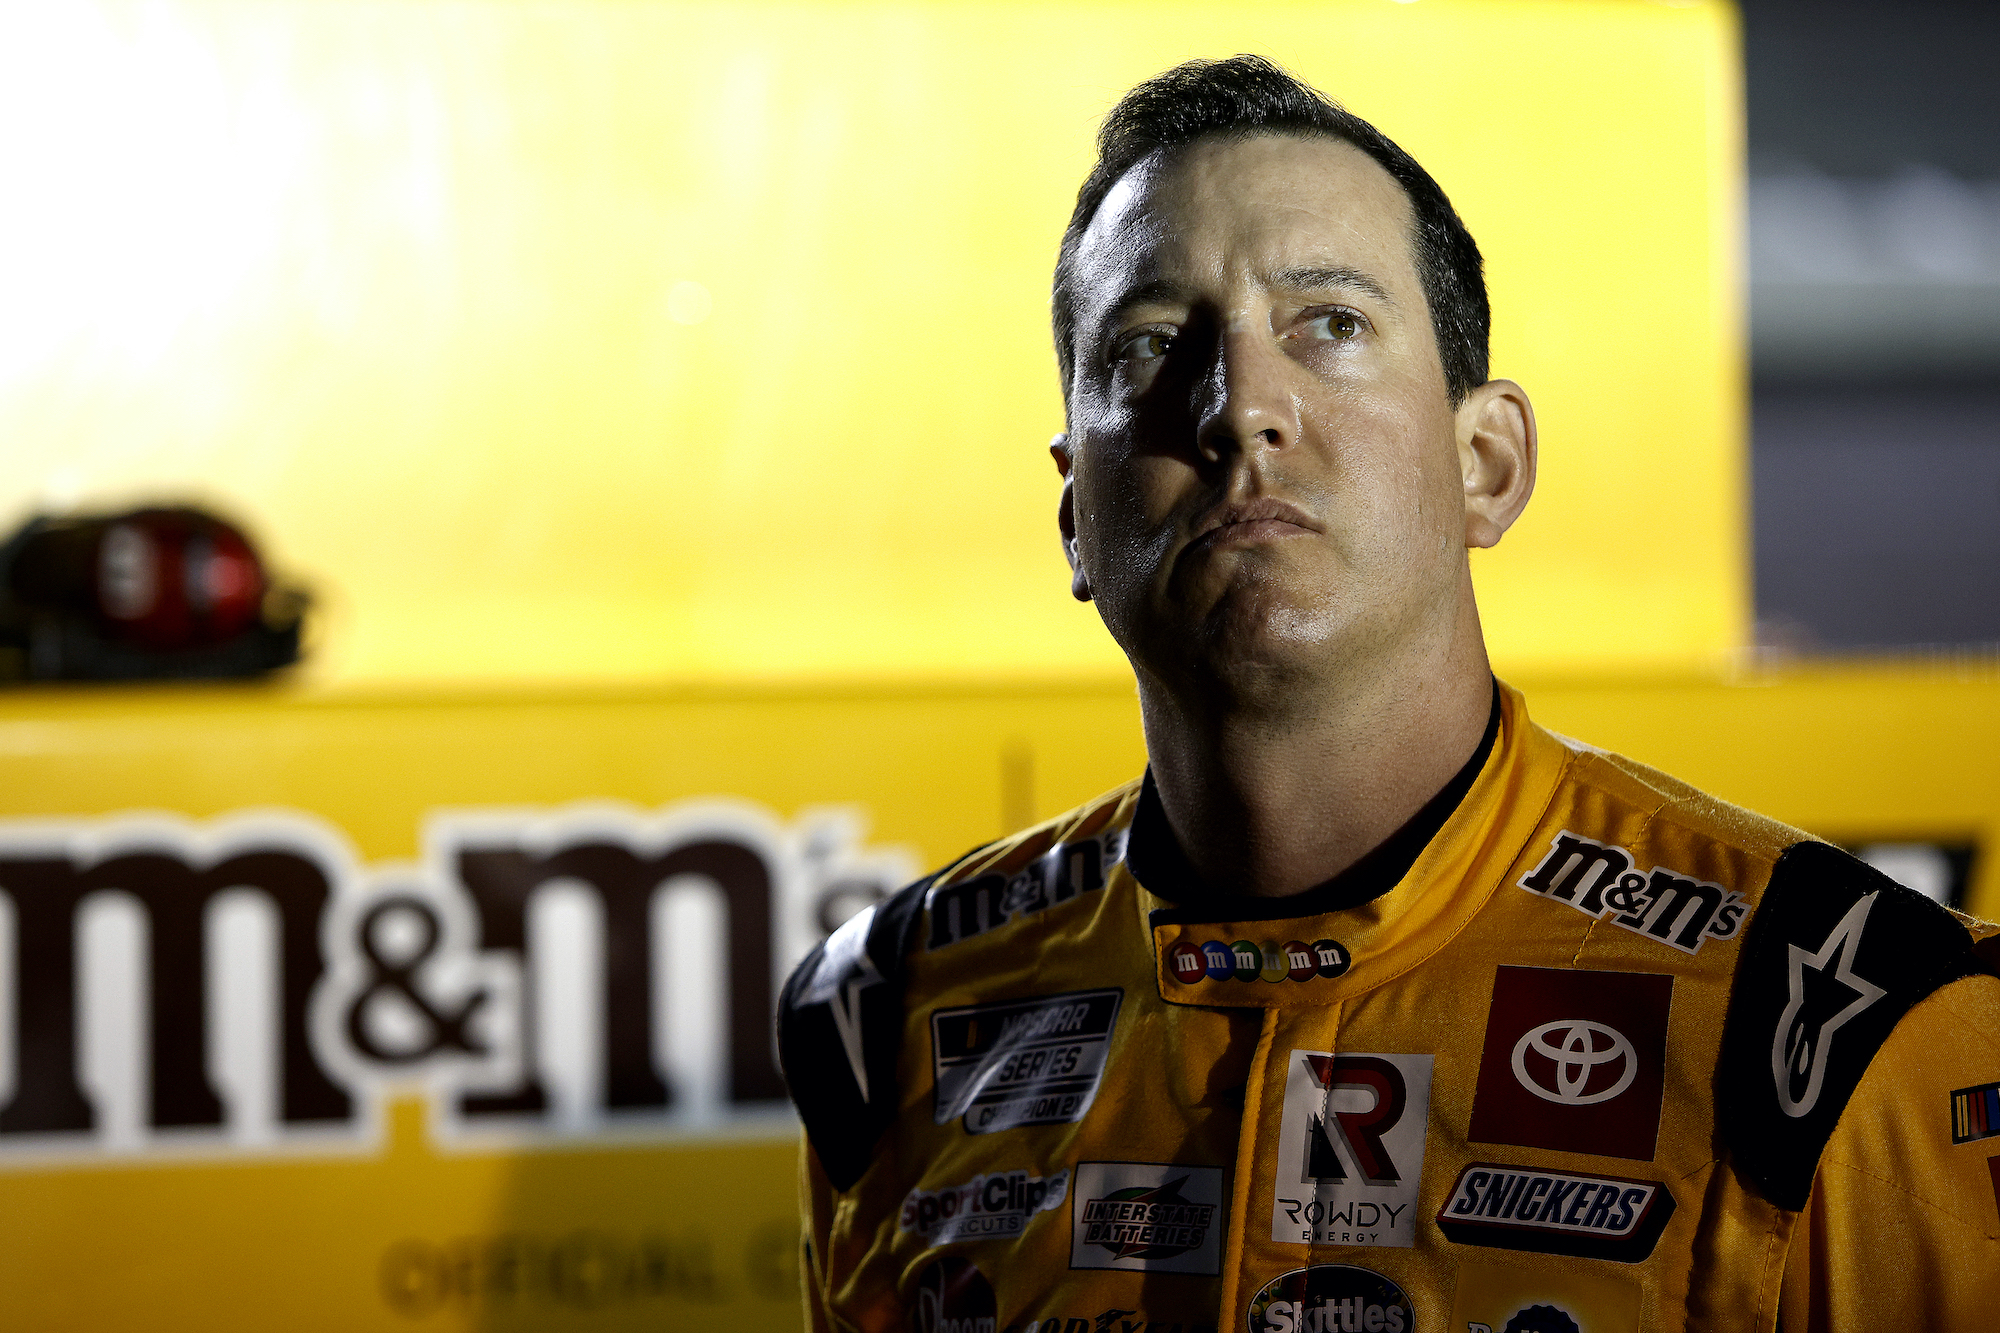 Kyle Busch looks on from grid